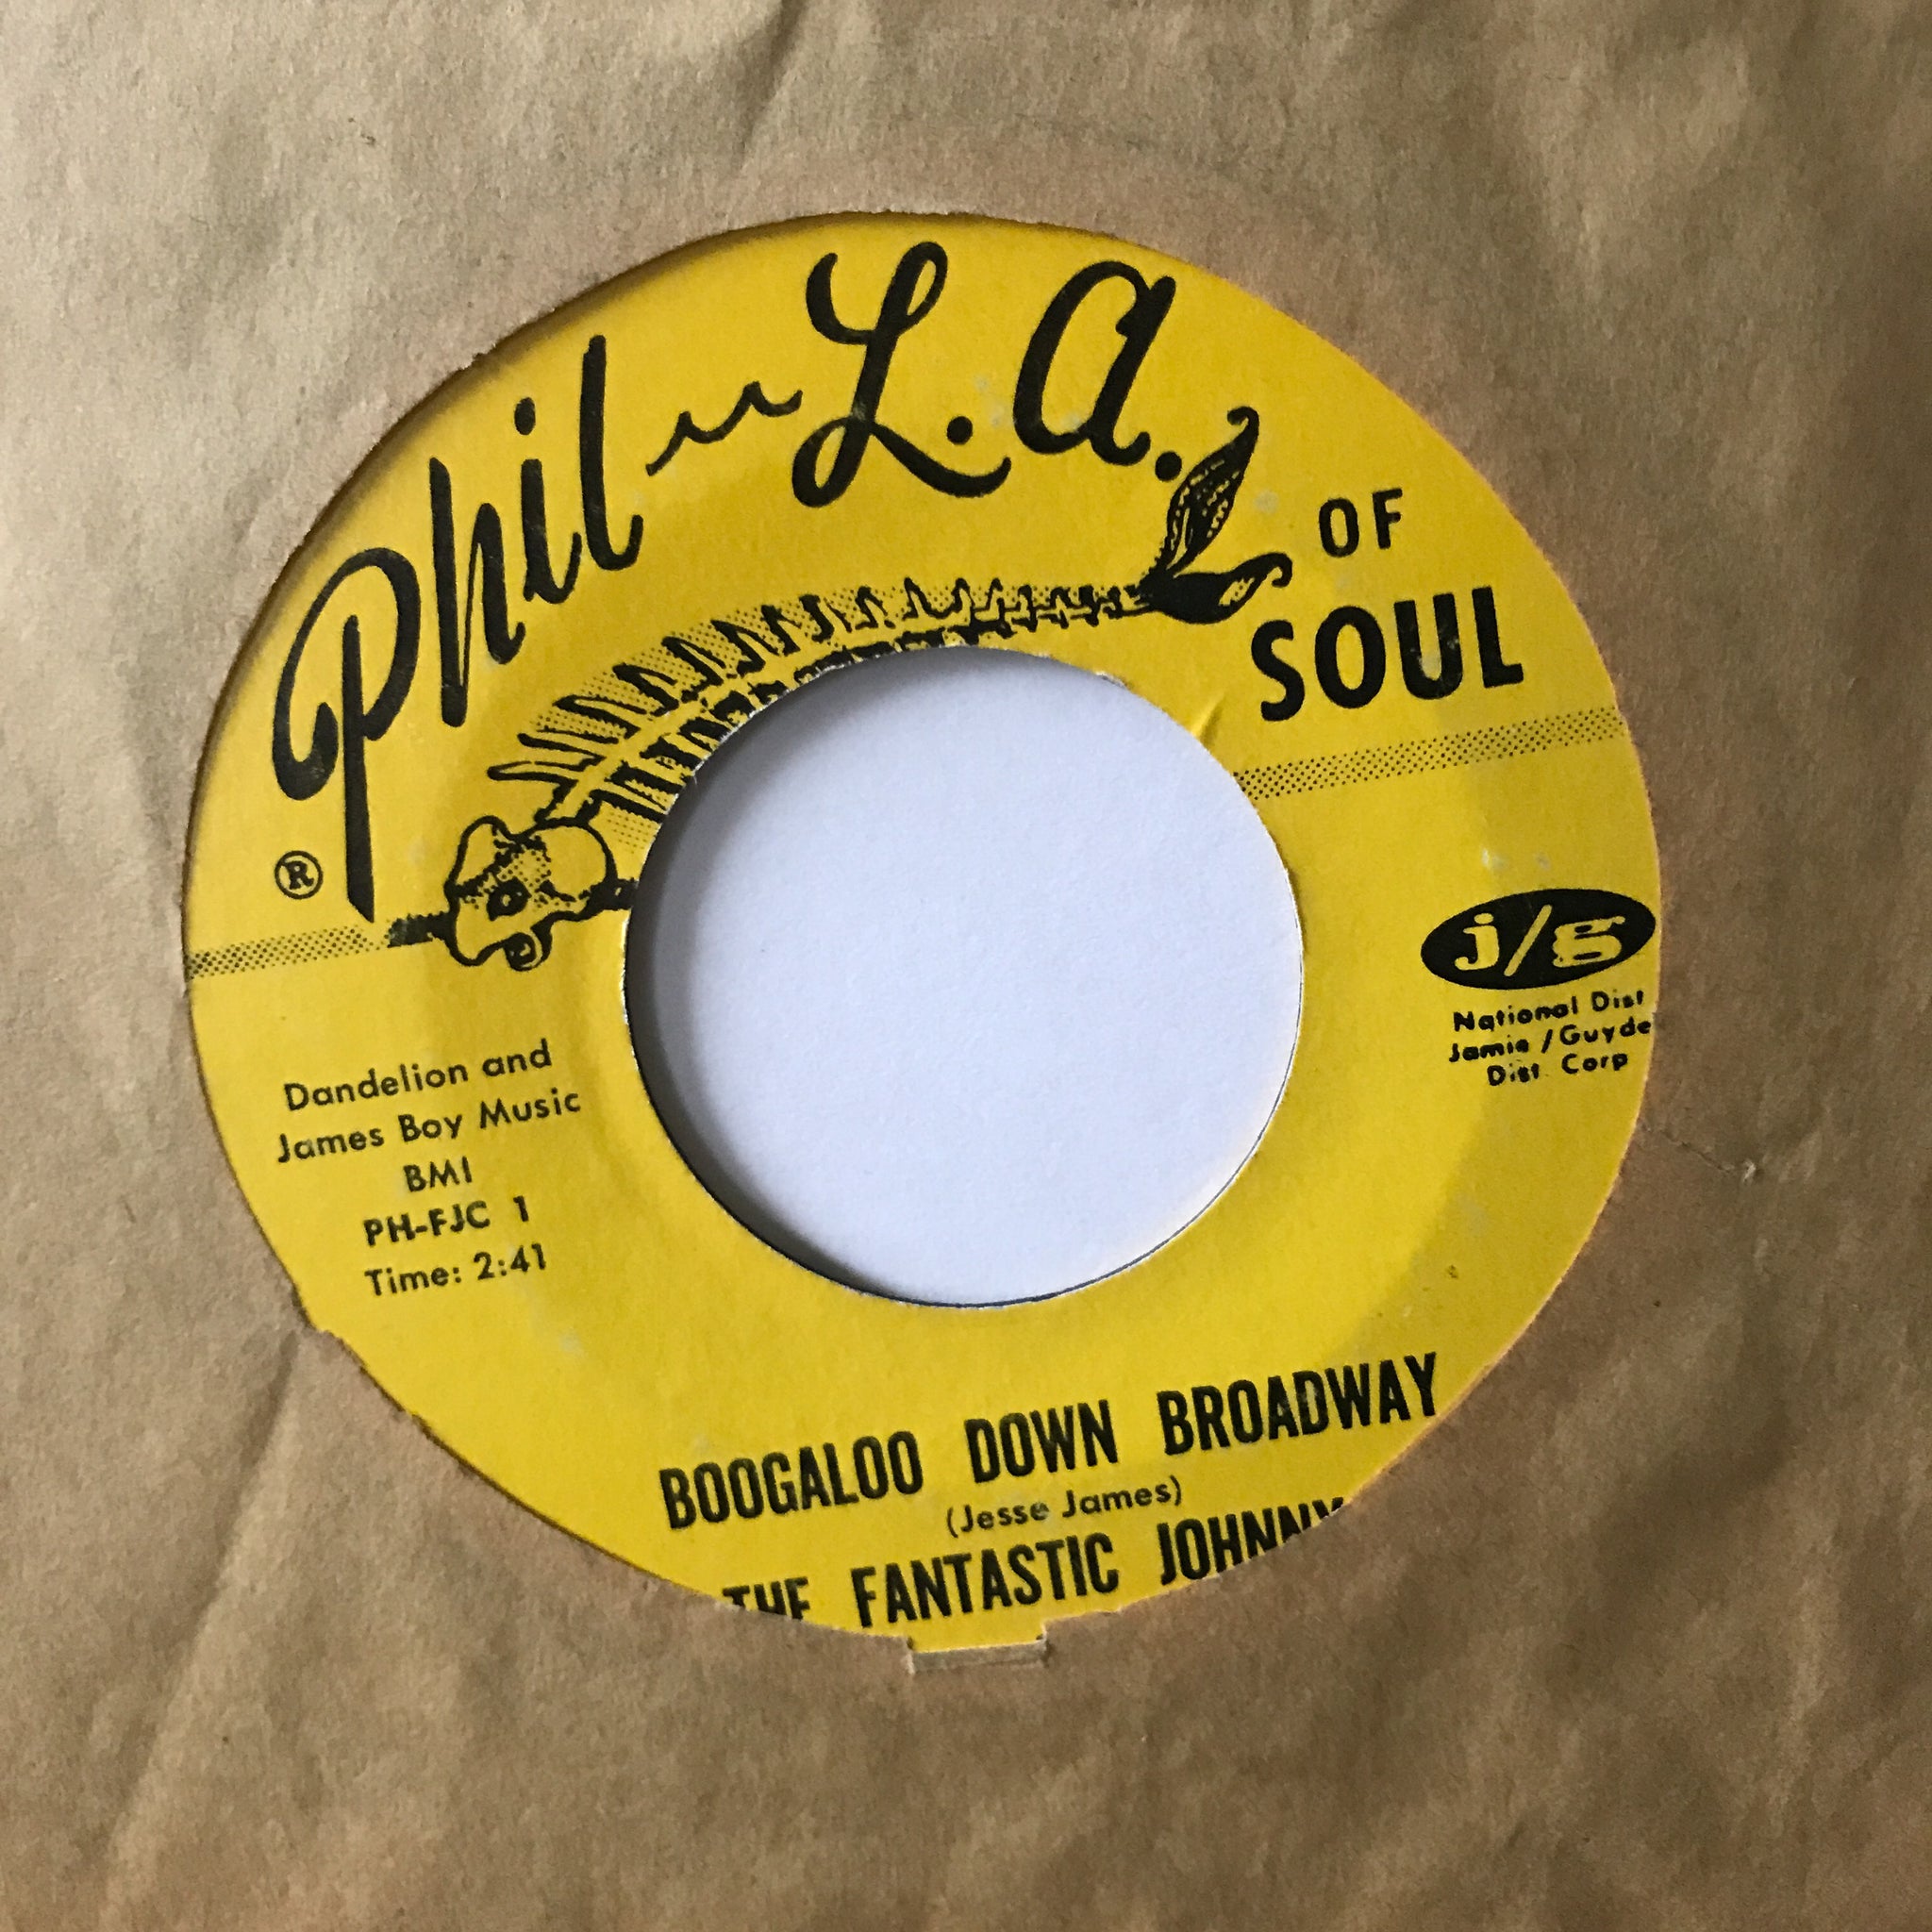 The Fantastic Johnny C ‎– Boogaloo Down Broadway / Look What Love Can Make You Do